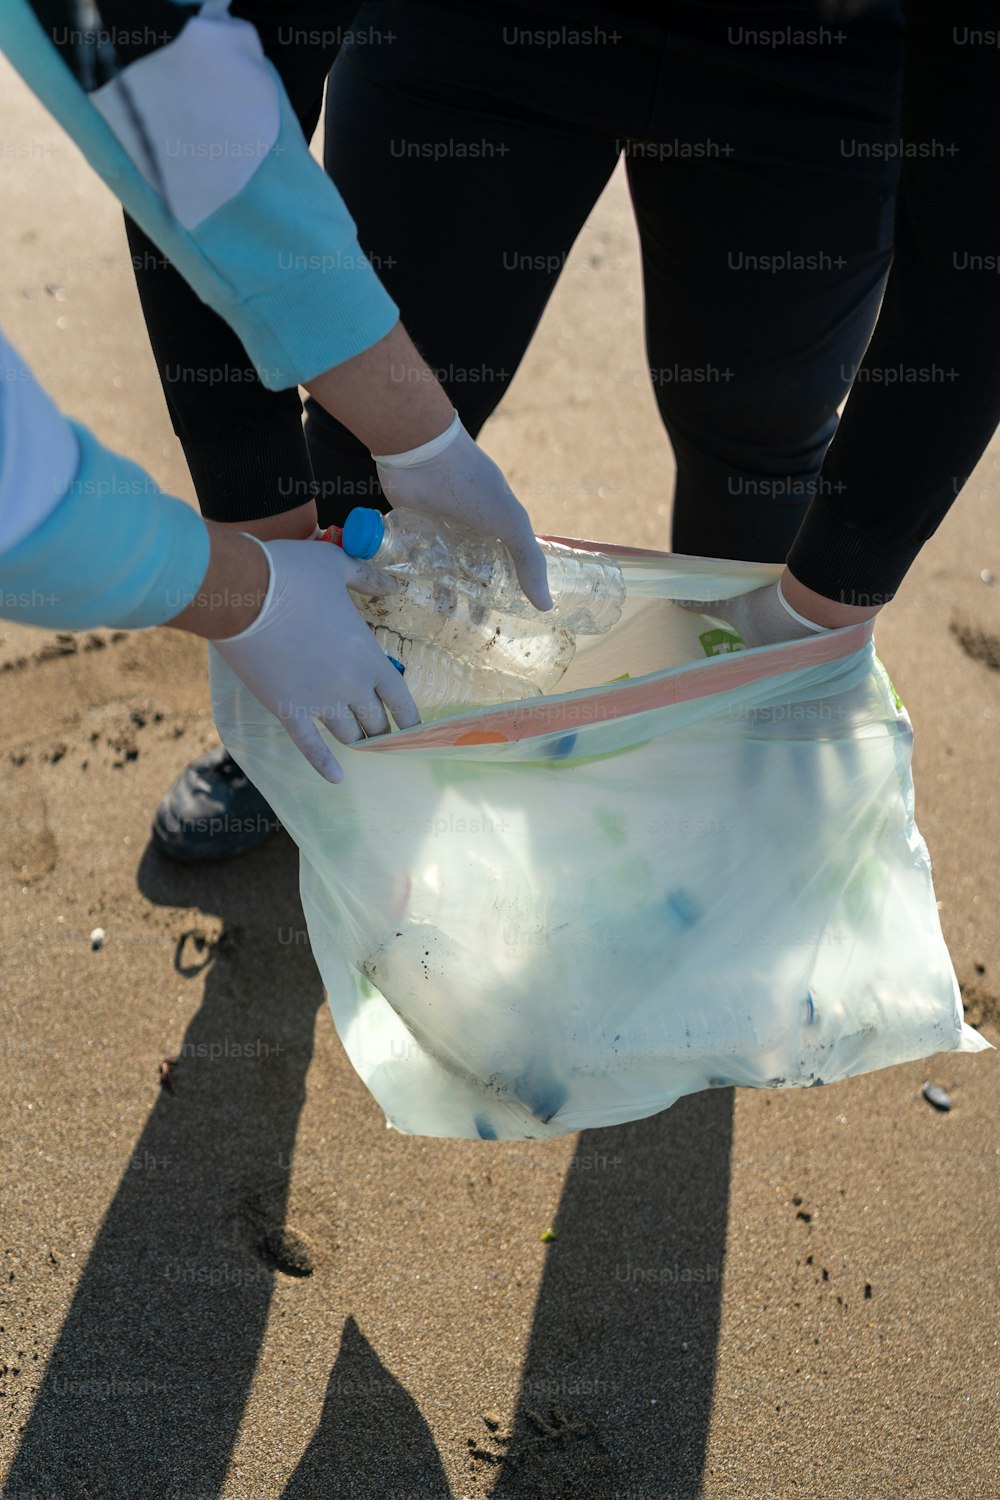 a person holding a plastic bag on a beach